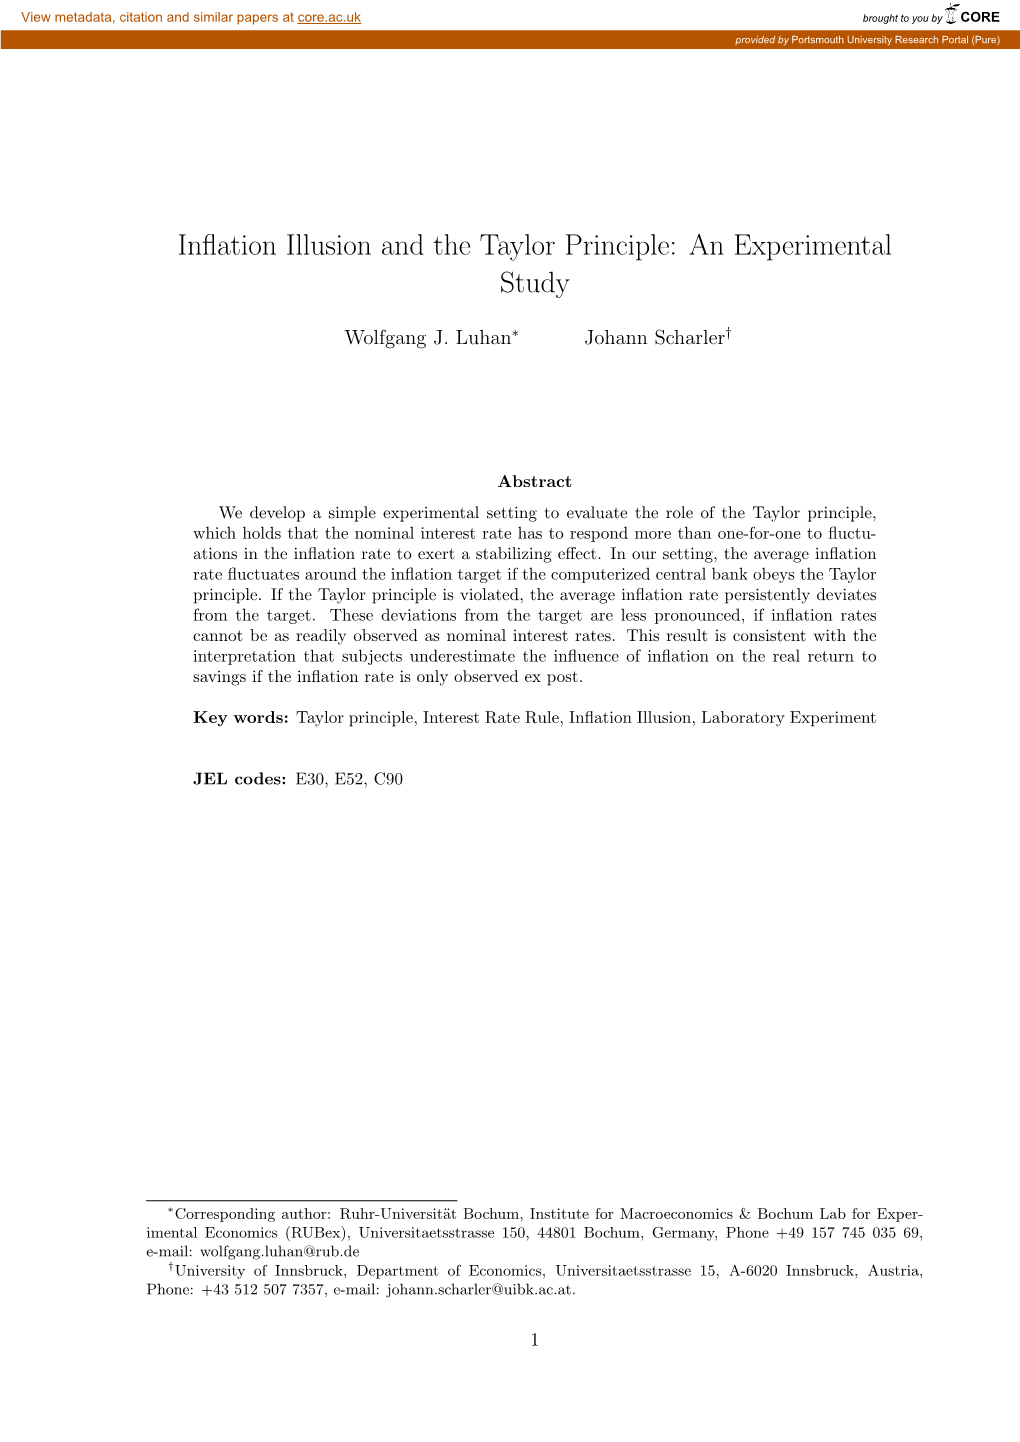 Inflation Illusion and the Taylor Principle: an Experimental Study